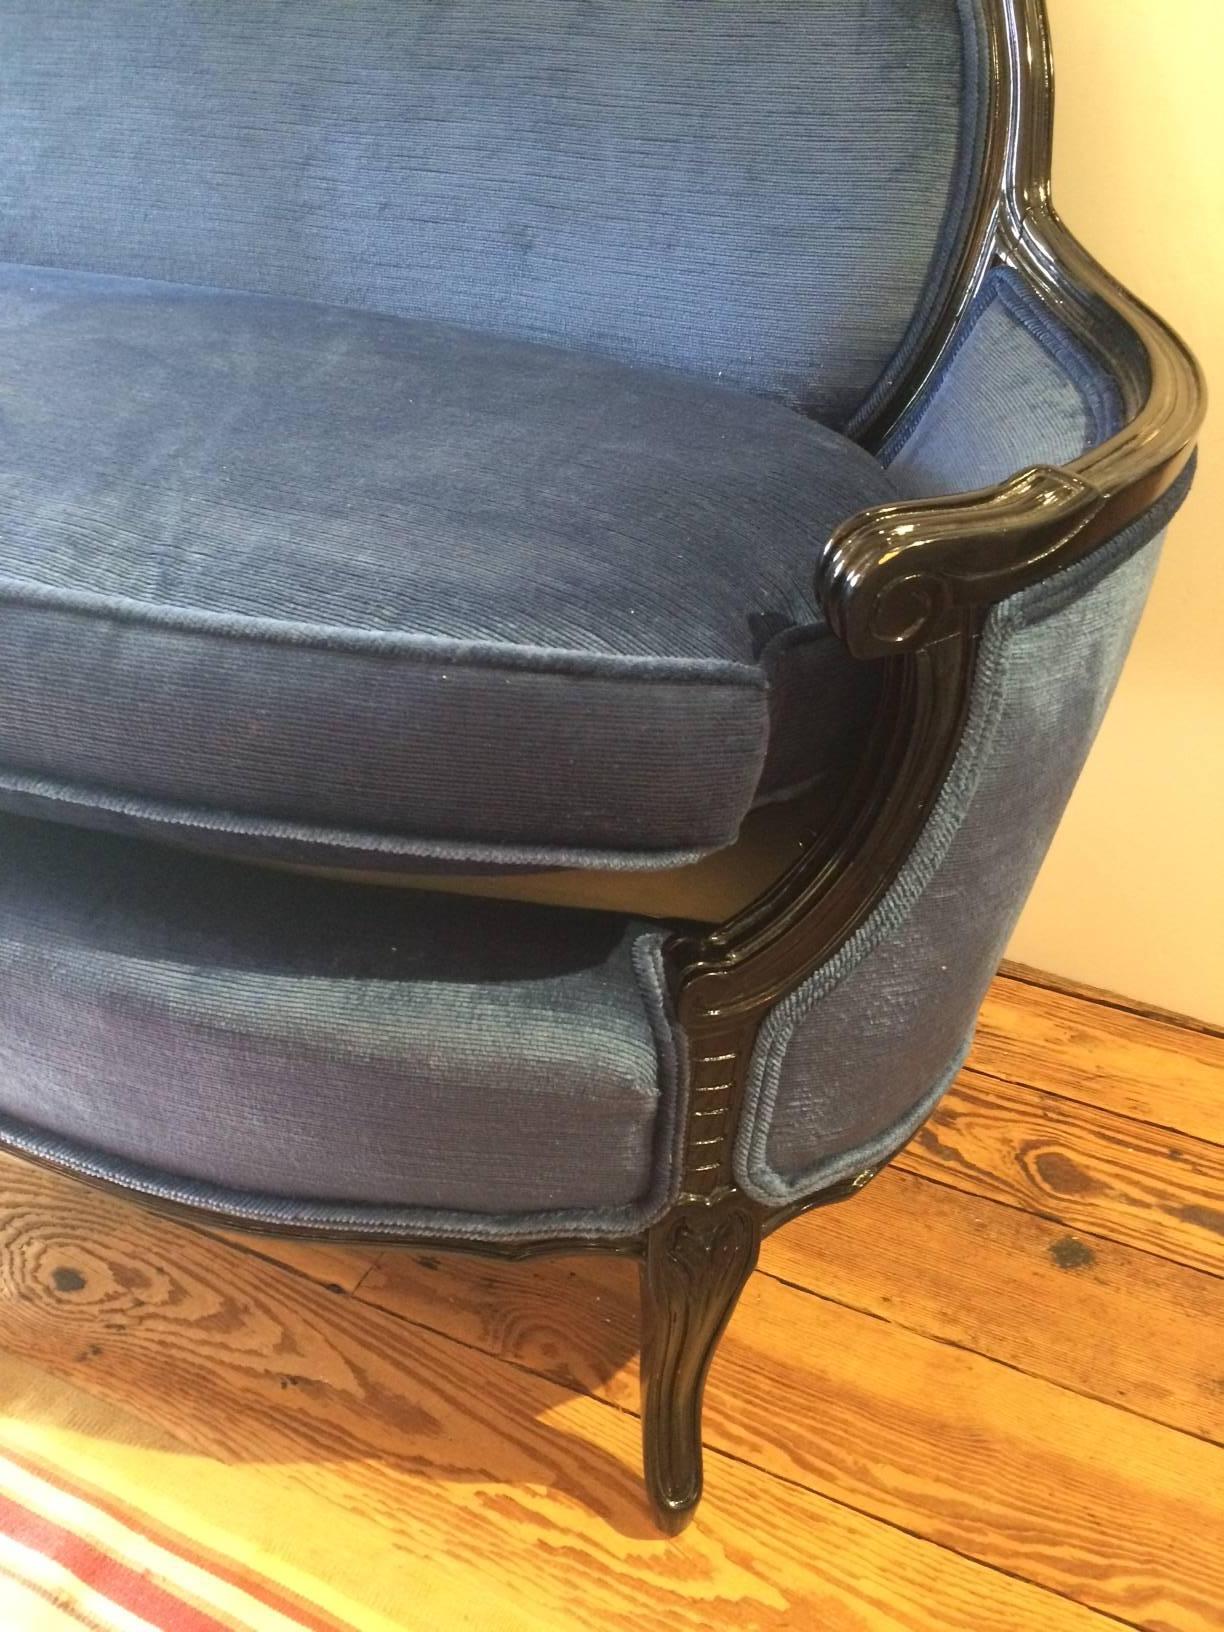 Classic elegant French vintage loveseat that's been glamorized with black glossy paint on the carved wood frame, and luxuriously outfitted in royal blue velvet.